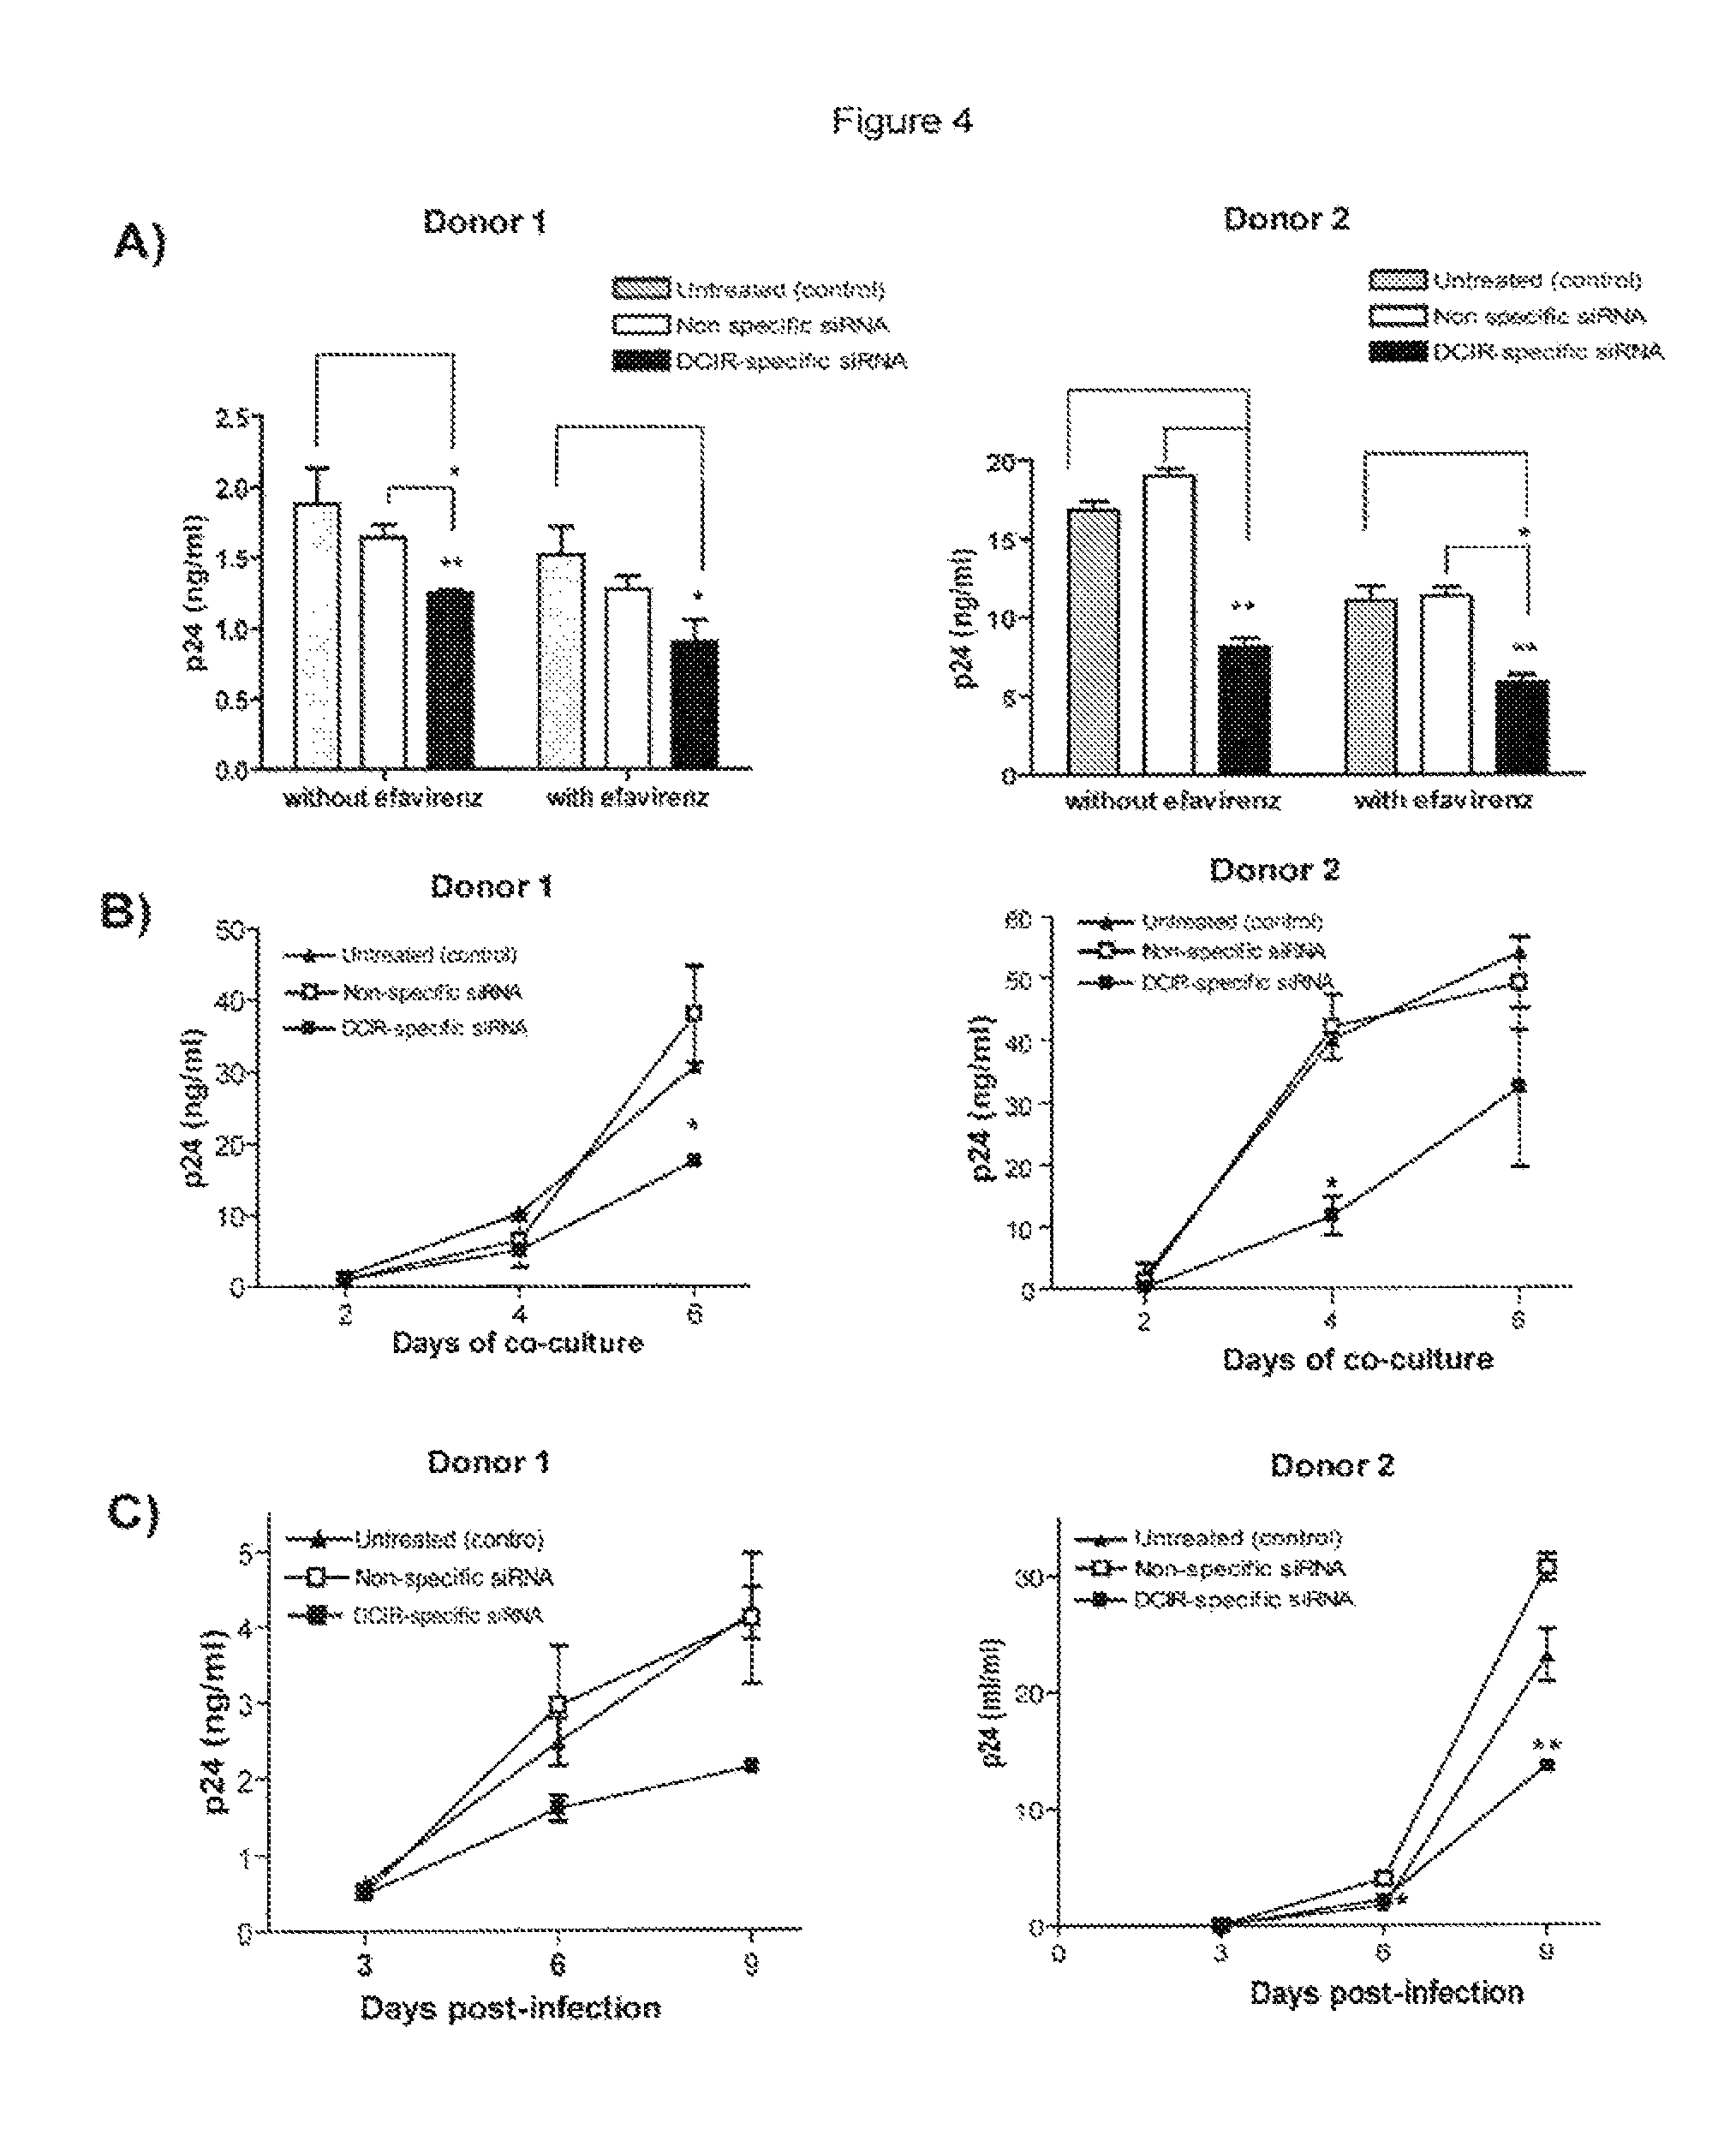 Method for inhibiting dendritic cell immunoreceptor (DCIR)-mediated human immunodeficiency virus infection comprising administering anti-DCIR antibodies